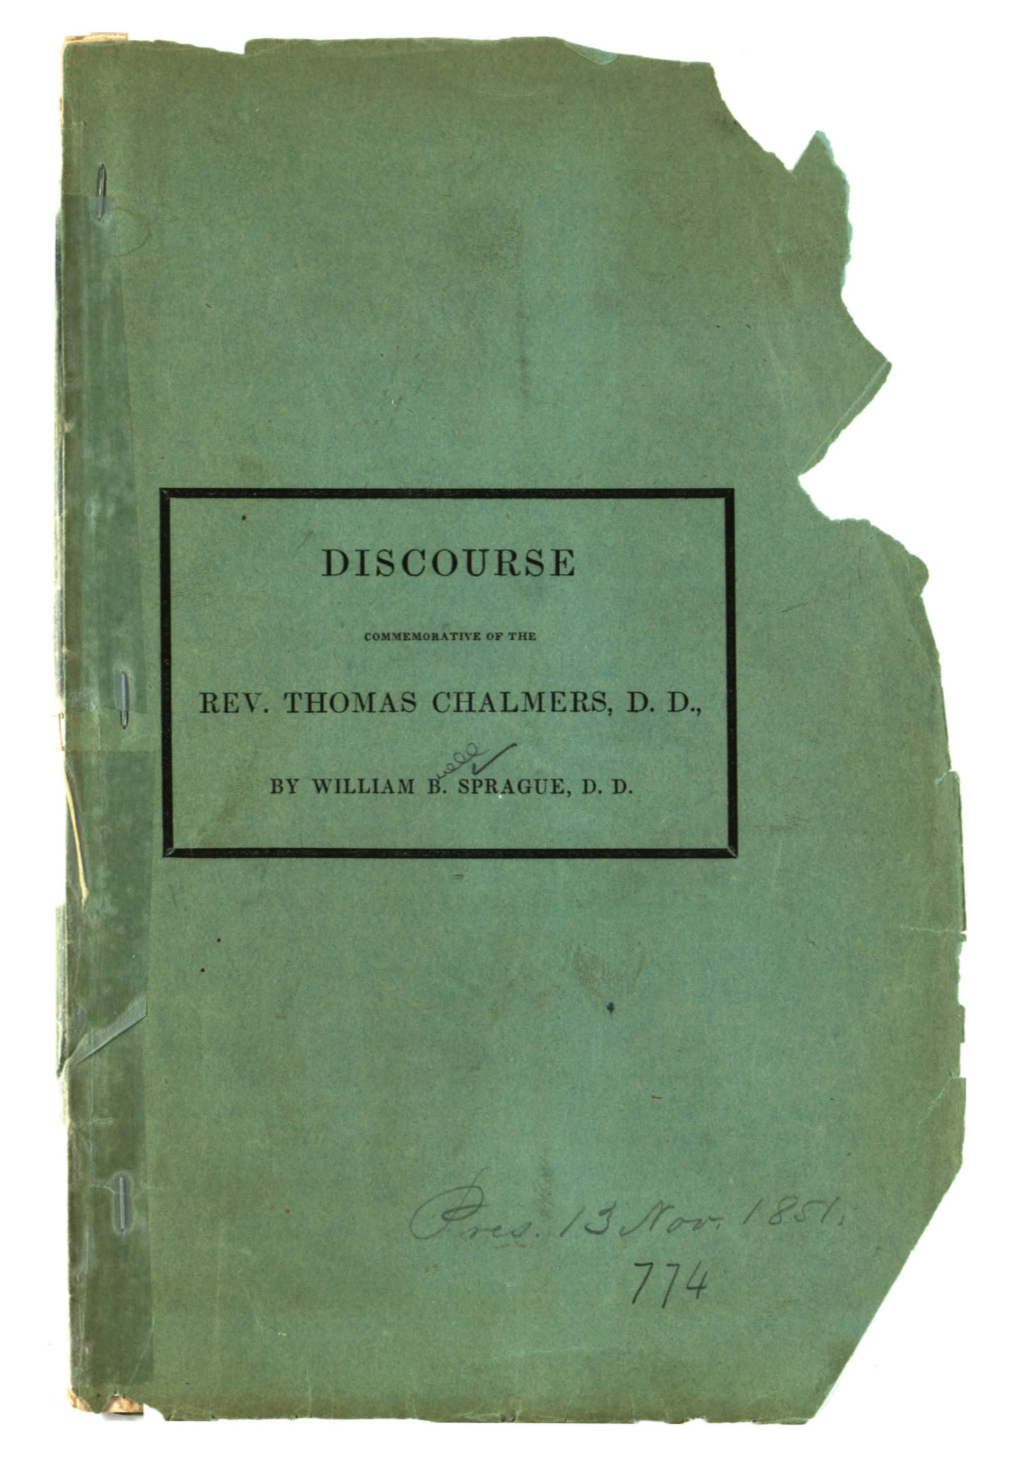 A Discourse Commemorative of the Rev. Thomas Chalmers, D.D